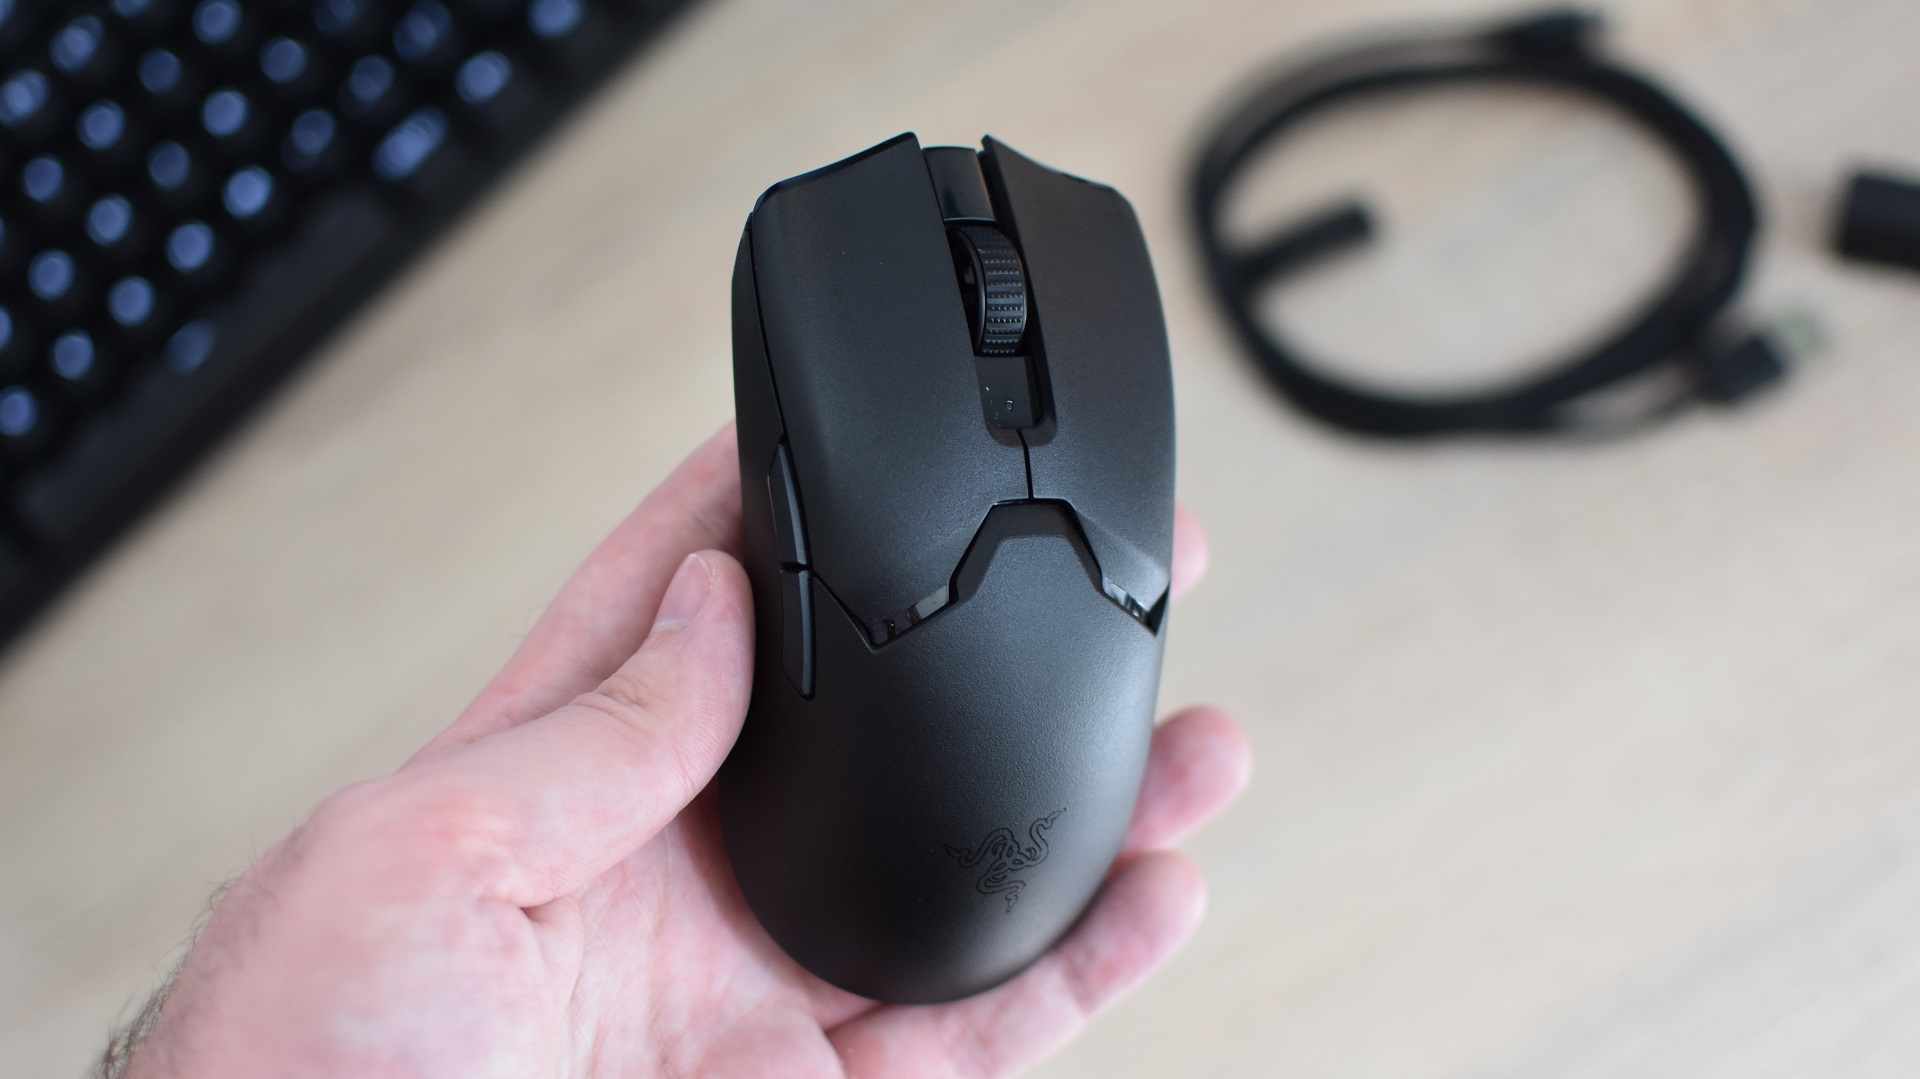 The Razer Viper V2 Pro gaming mouse being held in a hand.